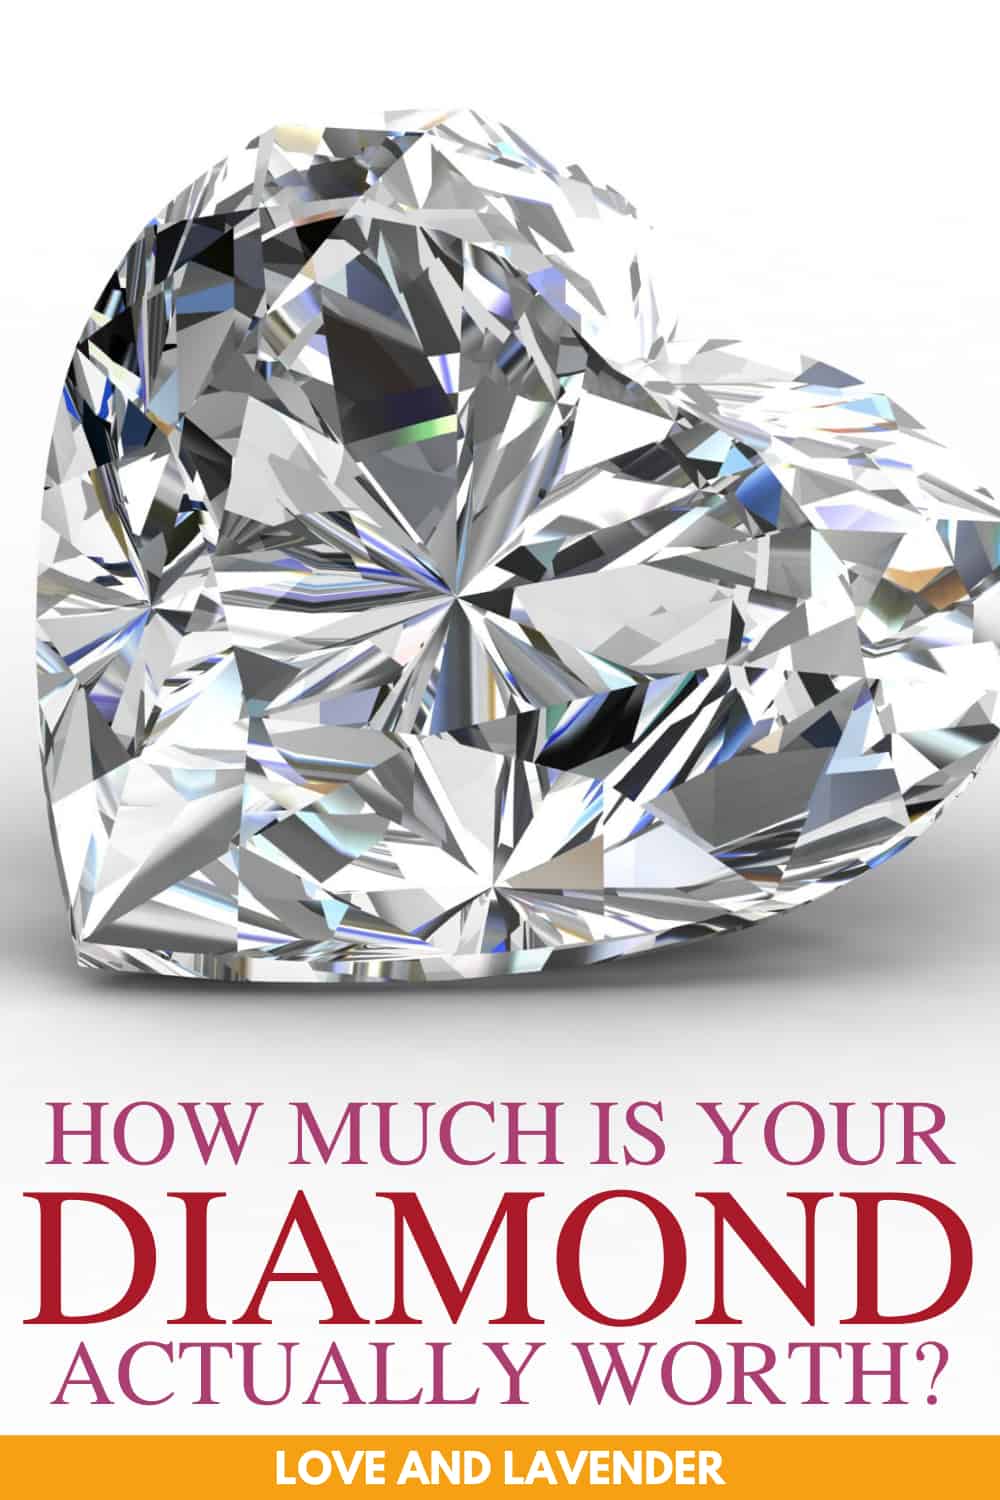 How Much is Your Diamond Actually Worth (Beyond the Emotional Value)?